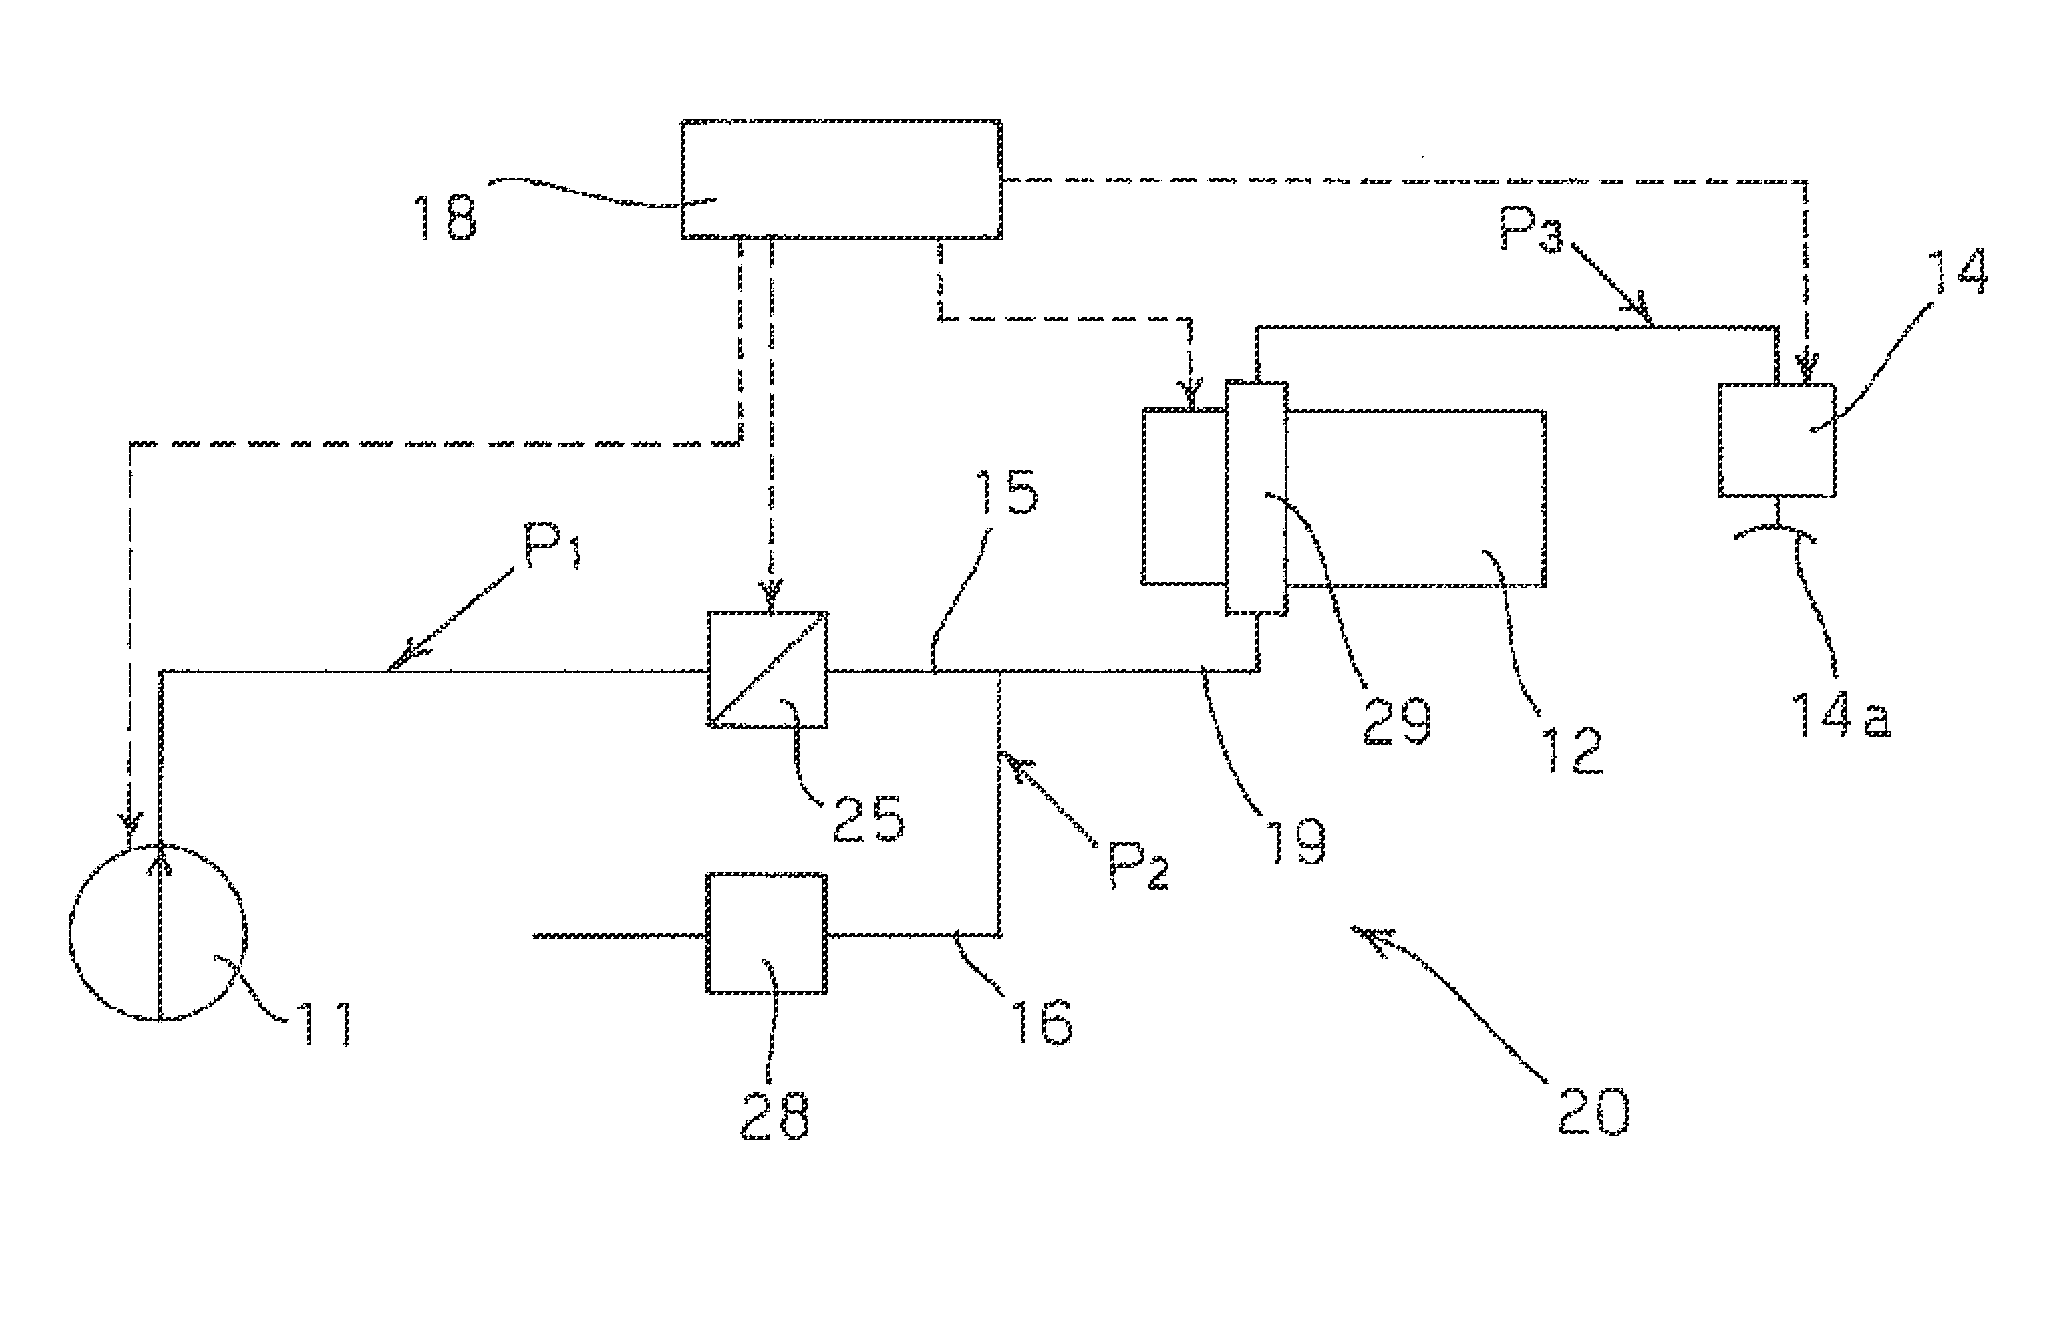 Method of preparing coffee infusions and machine for achieving same